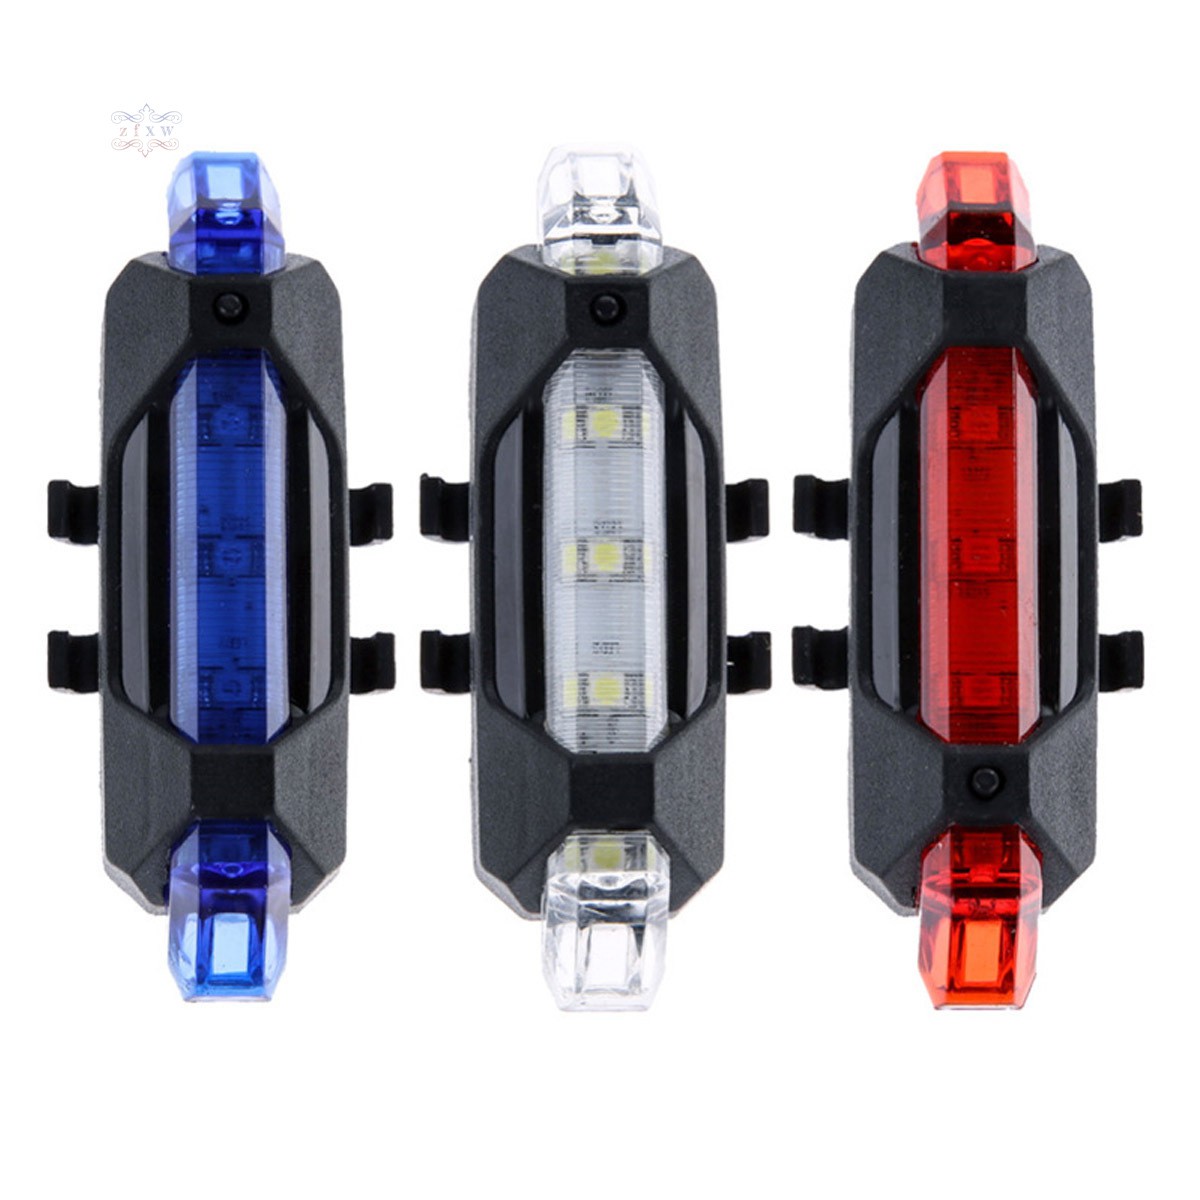 ZFXW Portable USB Rechargeable Bike Bicycle Tail Rear Safety Warning Light Taillight  Lamp Super Bright @VN